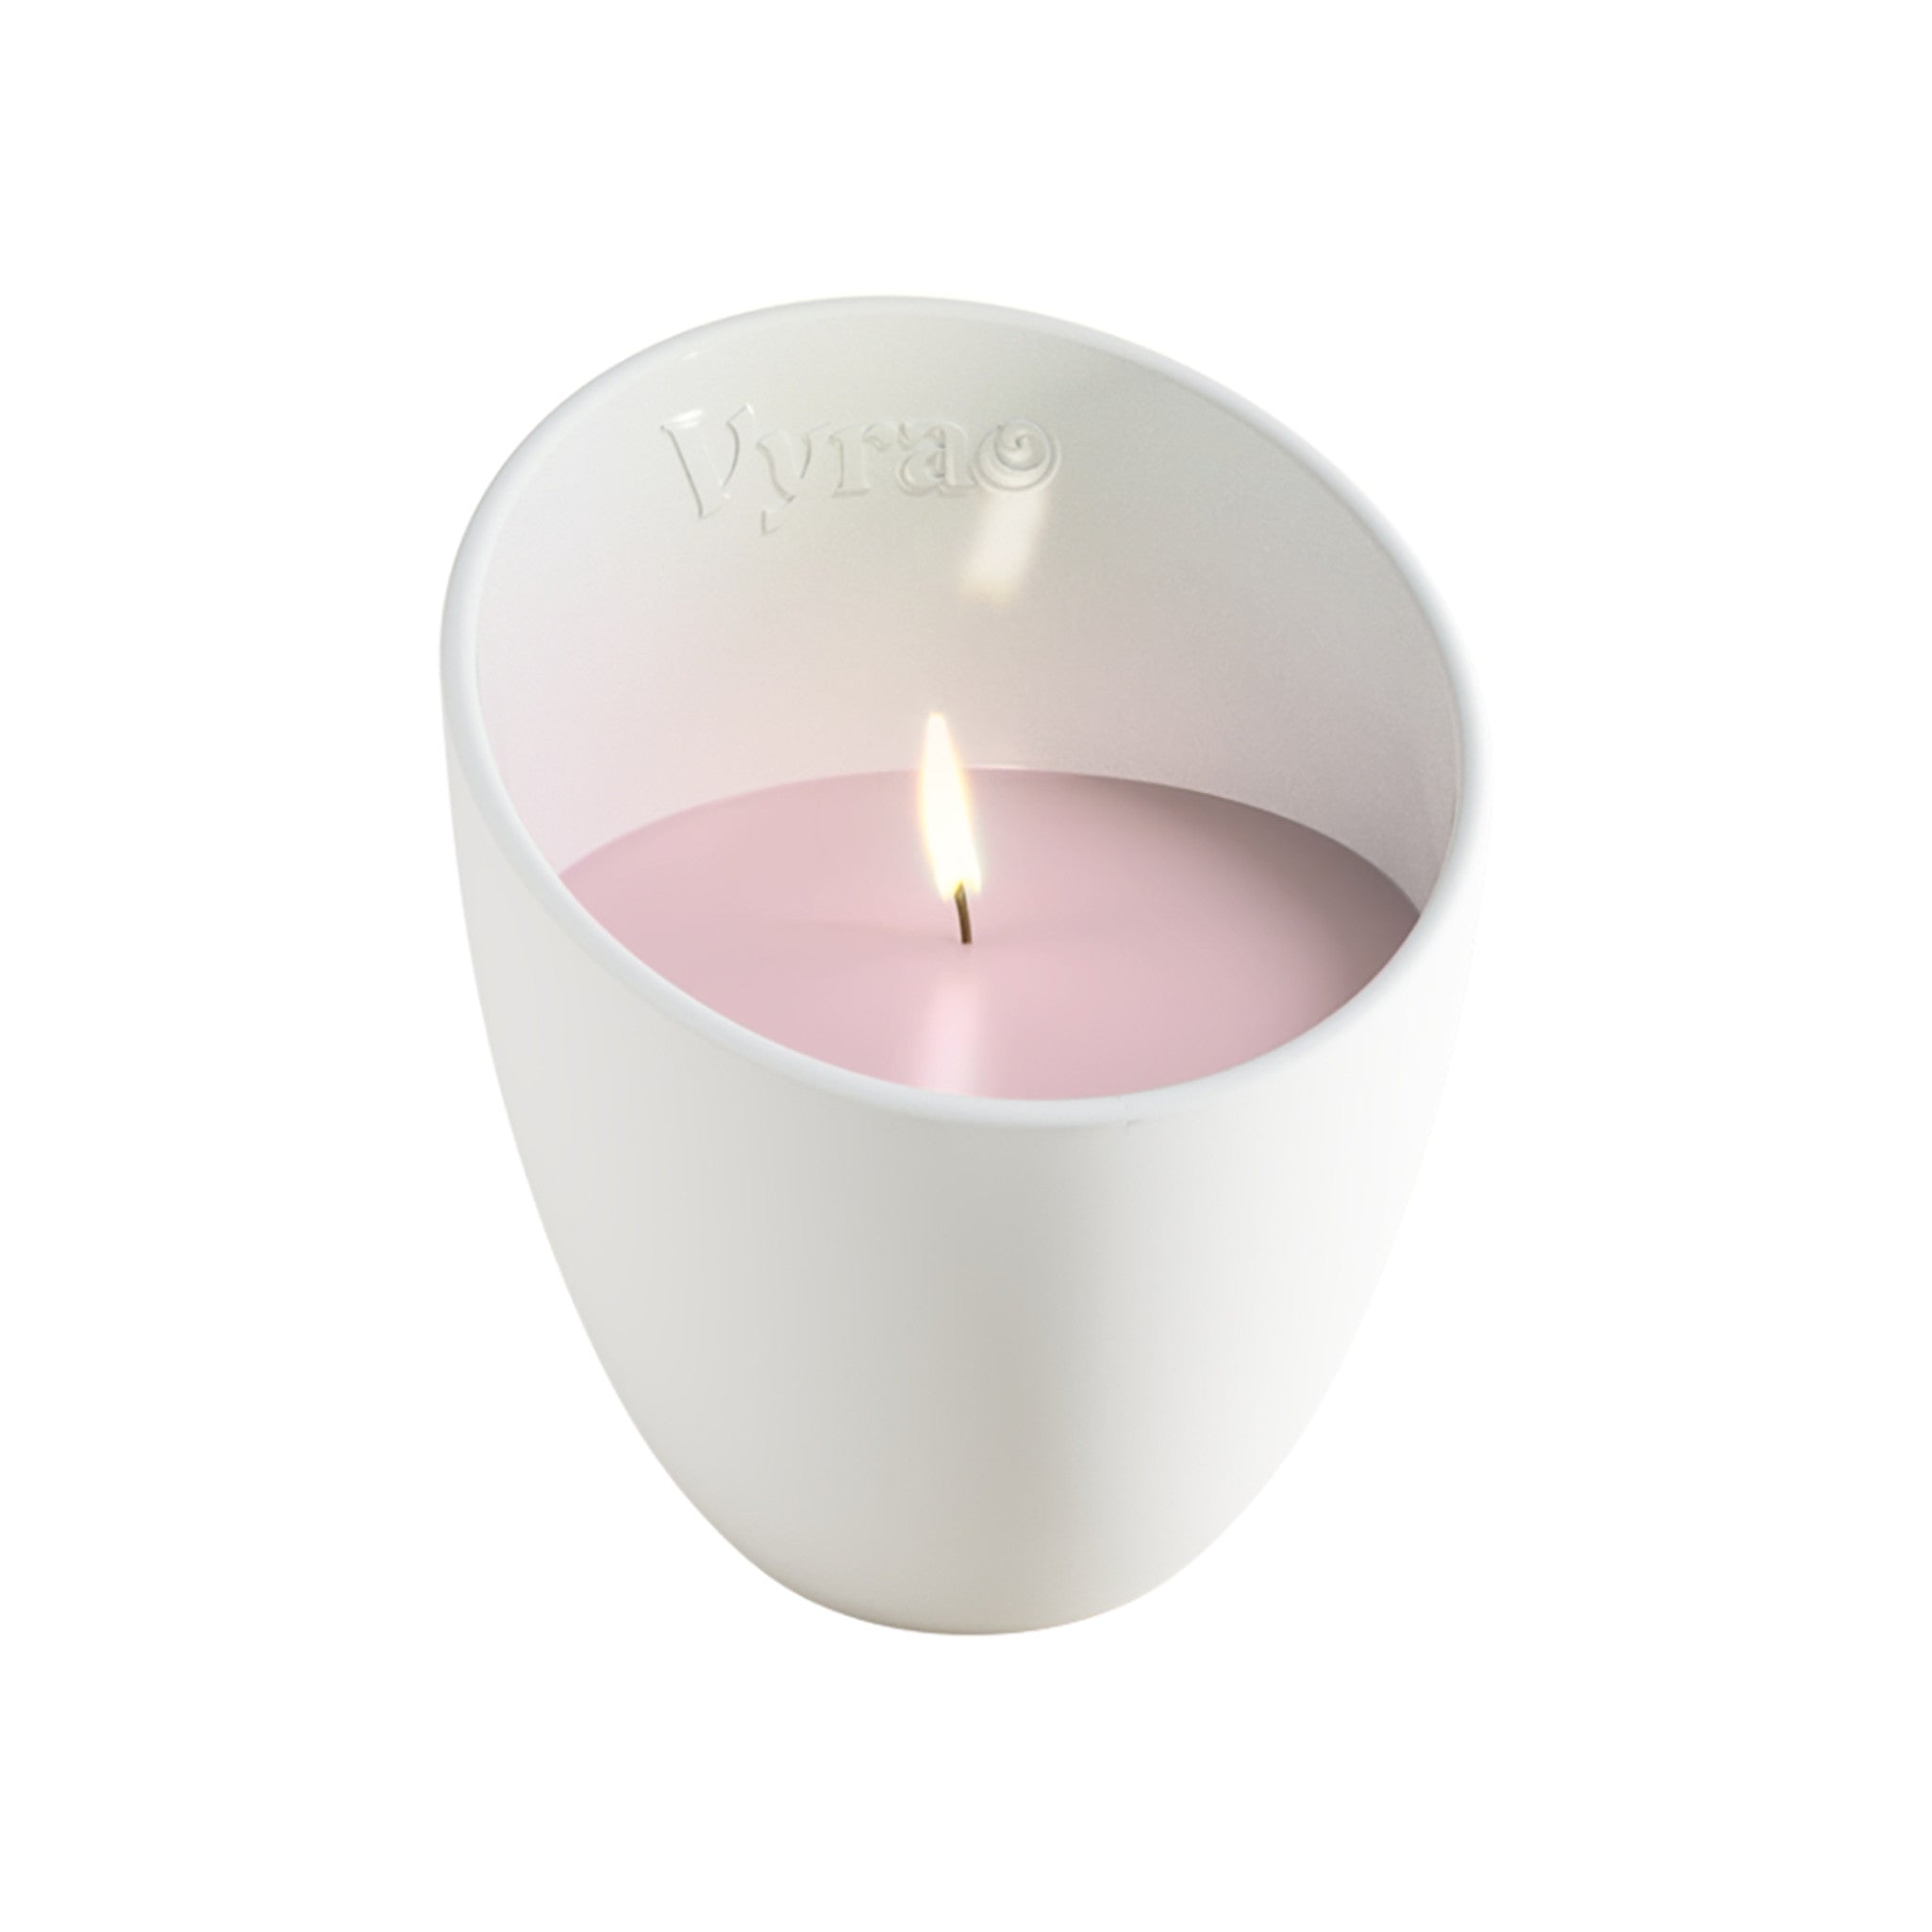 Vyrao Rose Marie Candle main image.